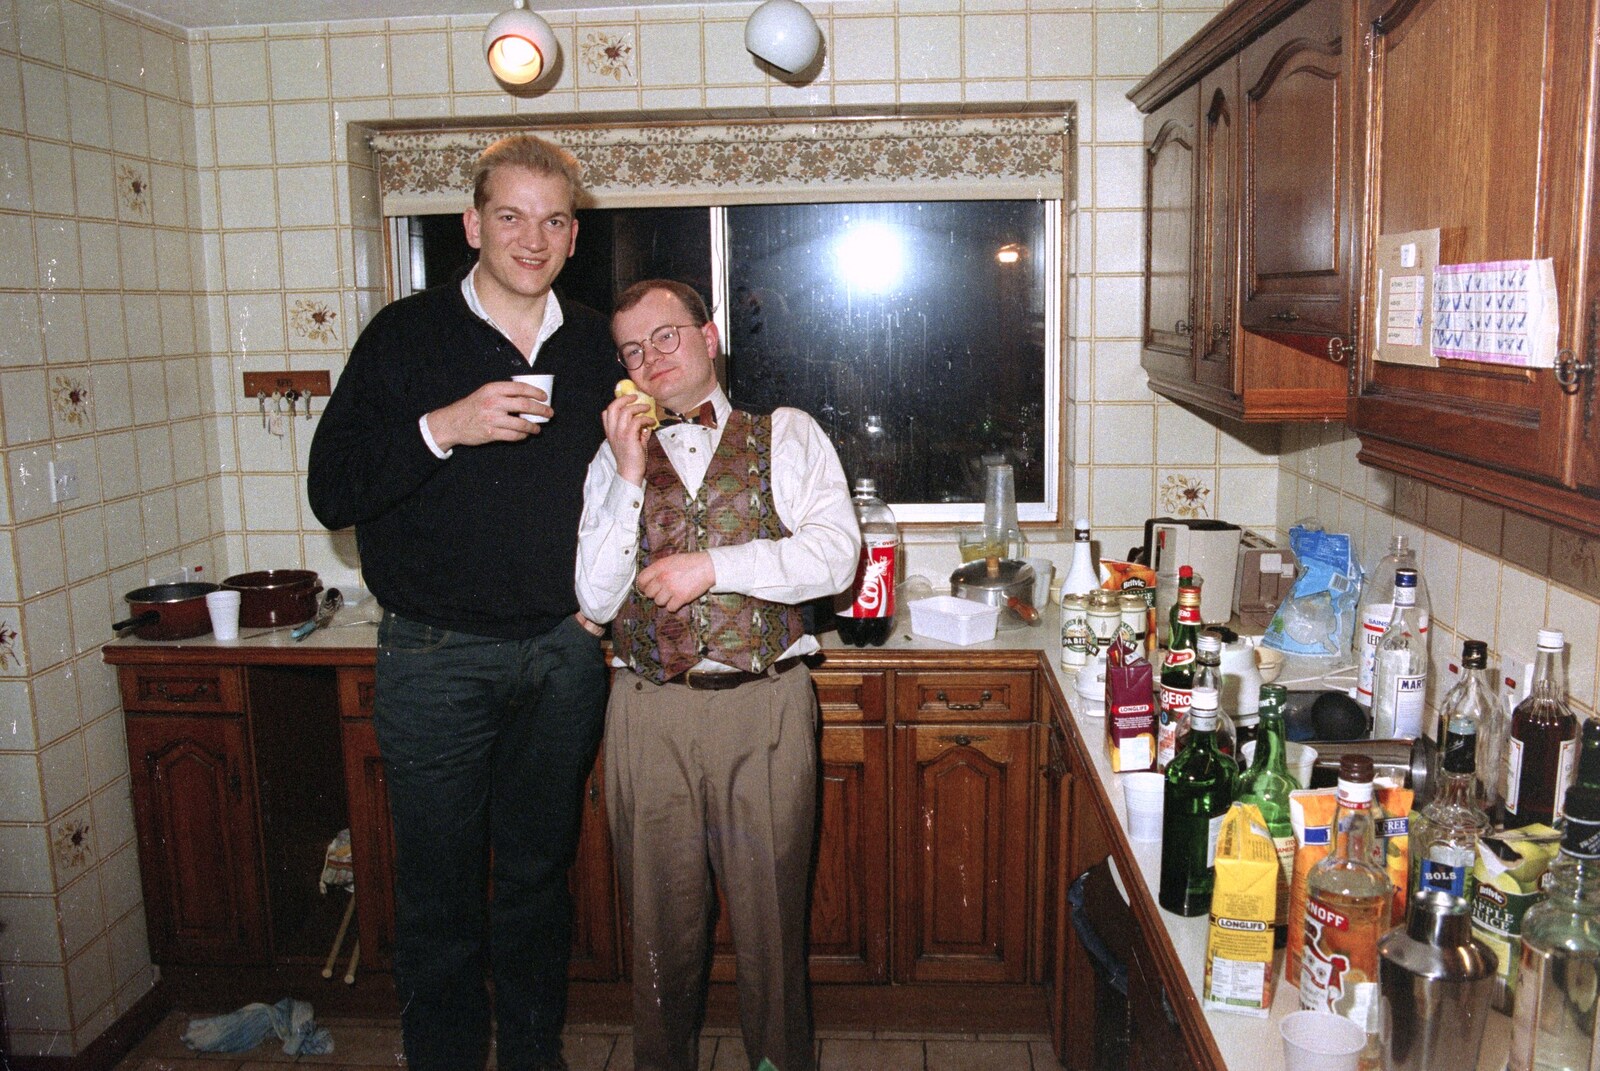 Hamish's Oxford Party, Oxfordshire - 25th April 1992: Hamish and a tall chum